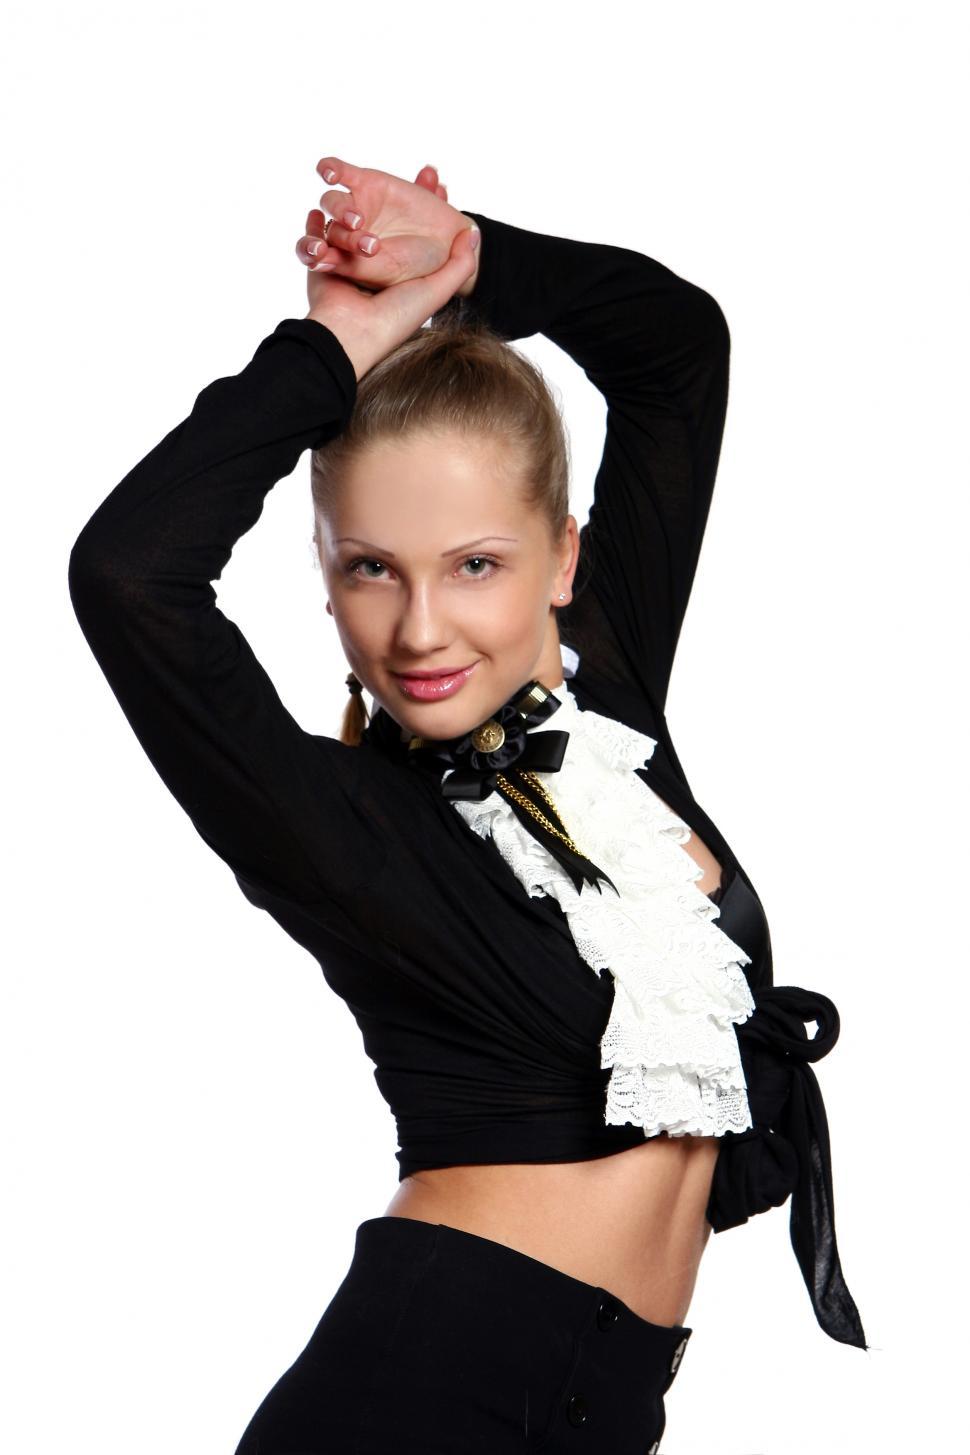 Free Image of fashionable and modern young dancer 